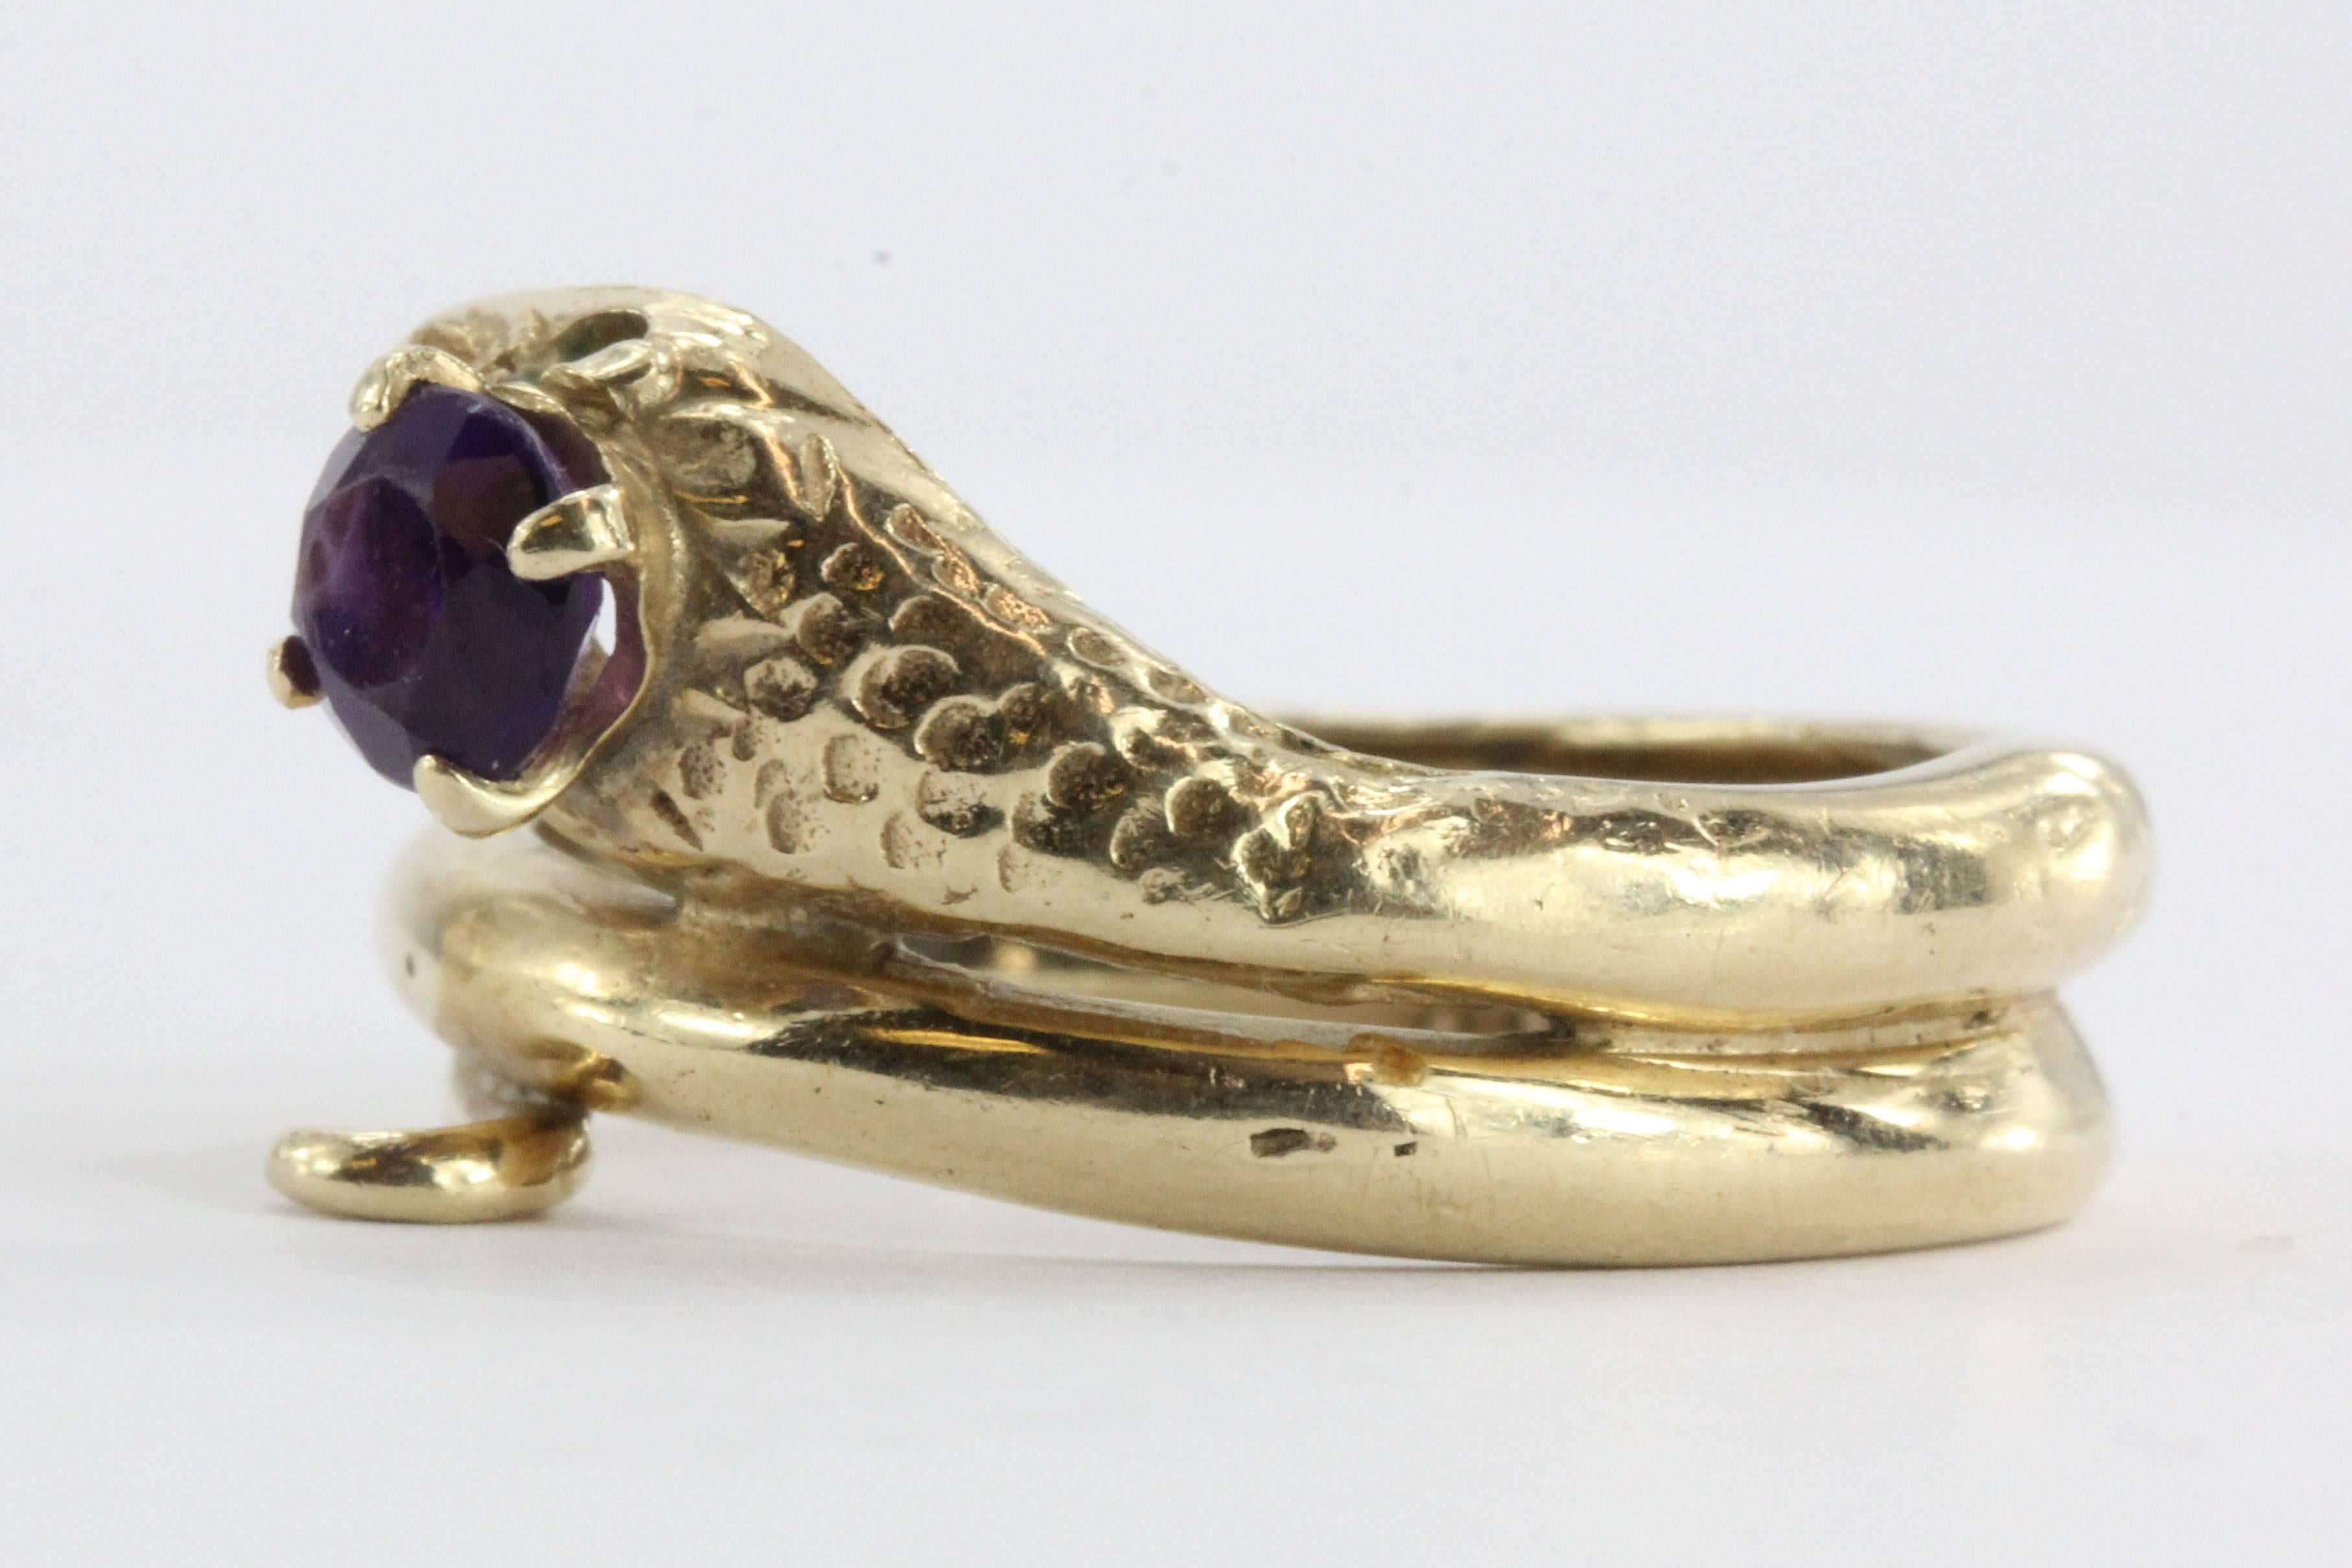 14K Gold & Amethyst Figural Gothic Curled Coiled Snake Ring. The ring is in excellent estate condition and ready to wear. It is hallmarked 14K but there is not a makers mark that I can find anywhere. The snake's head is set with an approximately .40